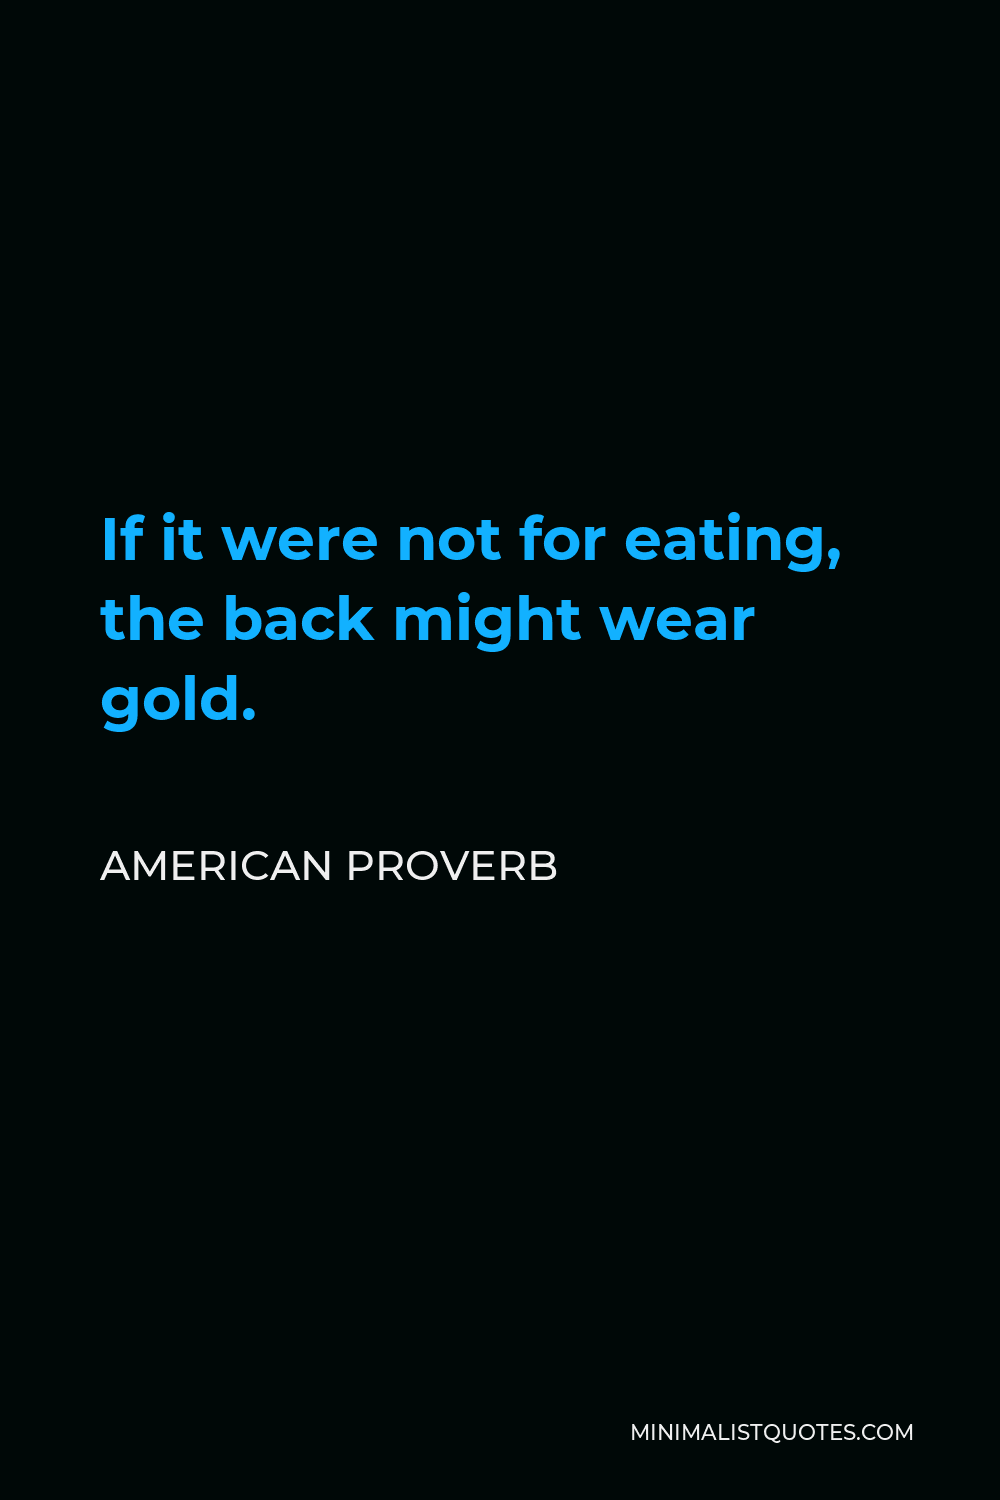 American Proverb Quote - If it were not for eating, the back might wear gold.